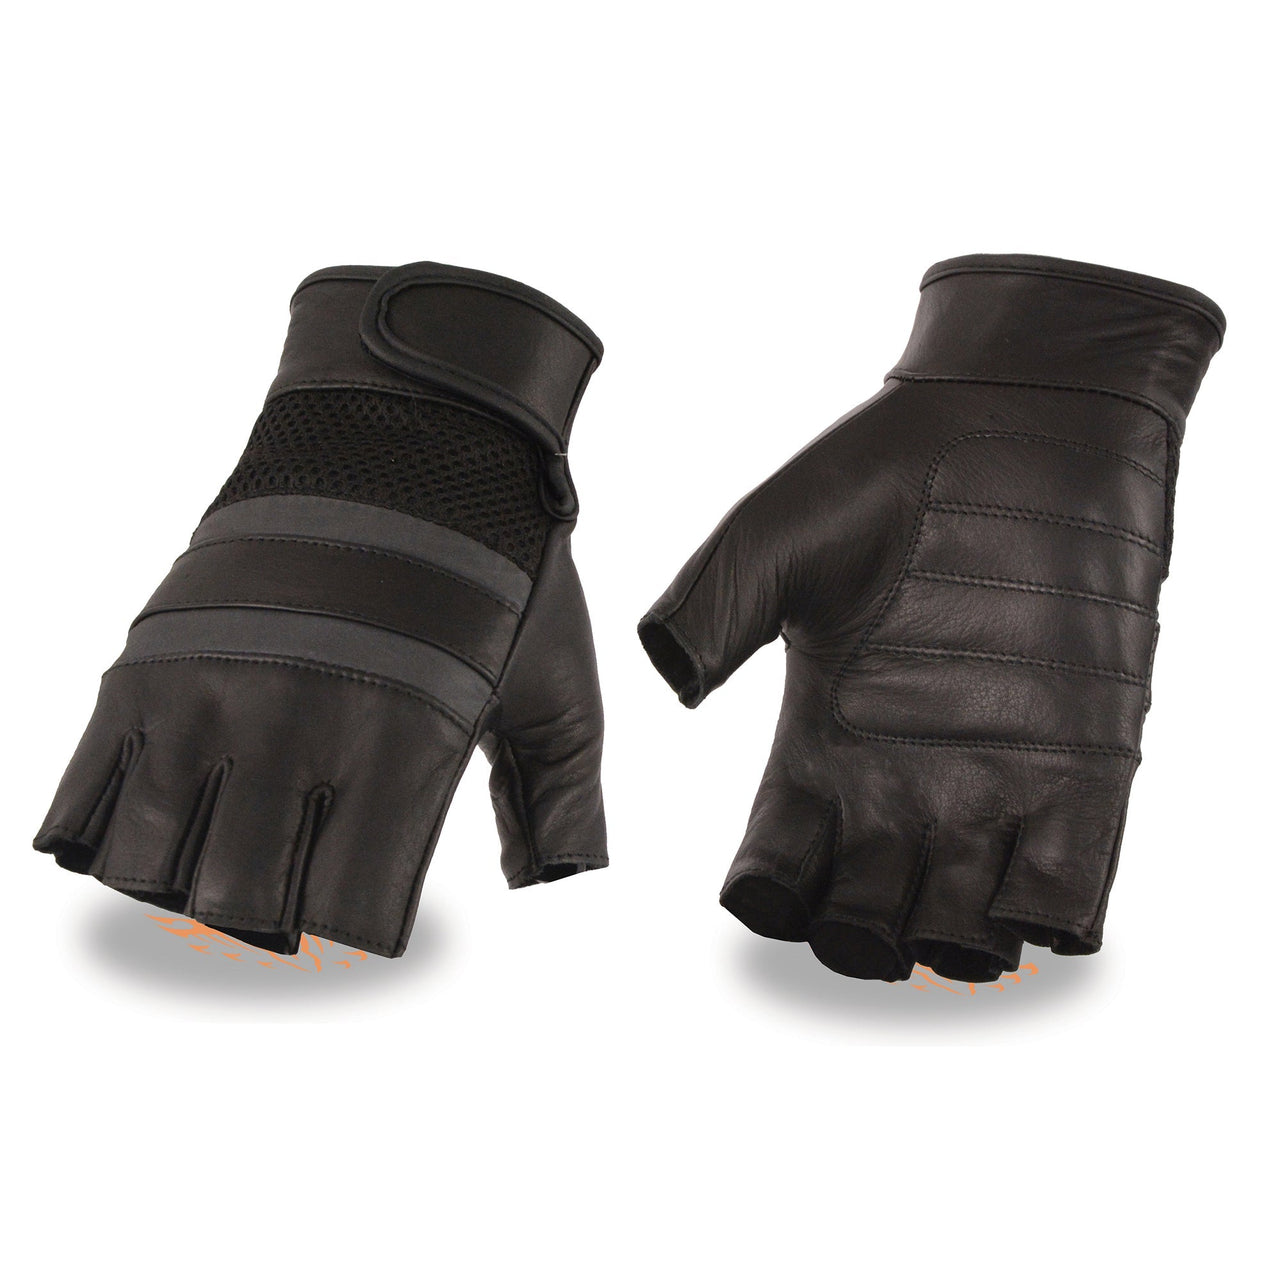 Men's Leather & Mesh Fingerless Gloves with Gel Palm, Reflective Band - HighwayLeather